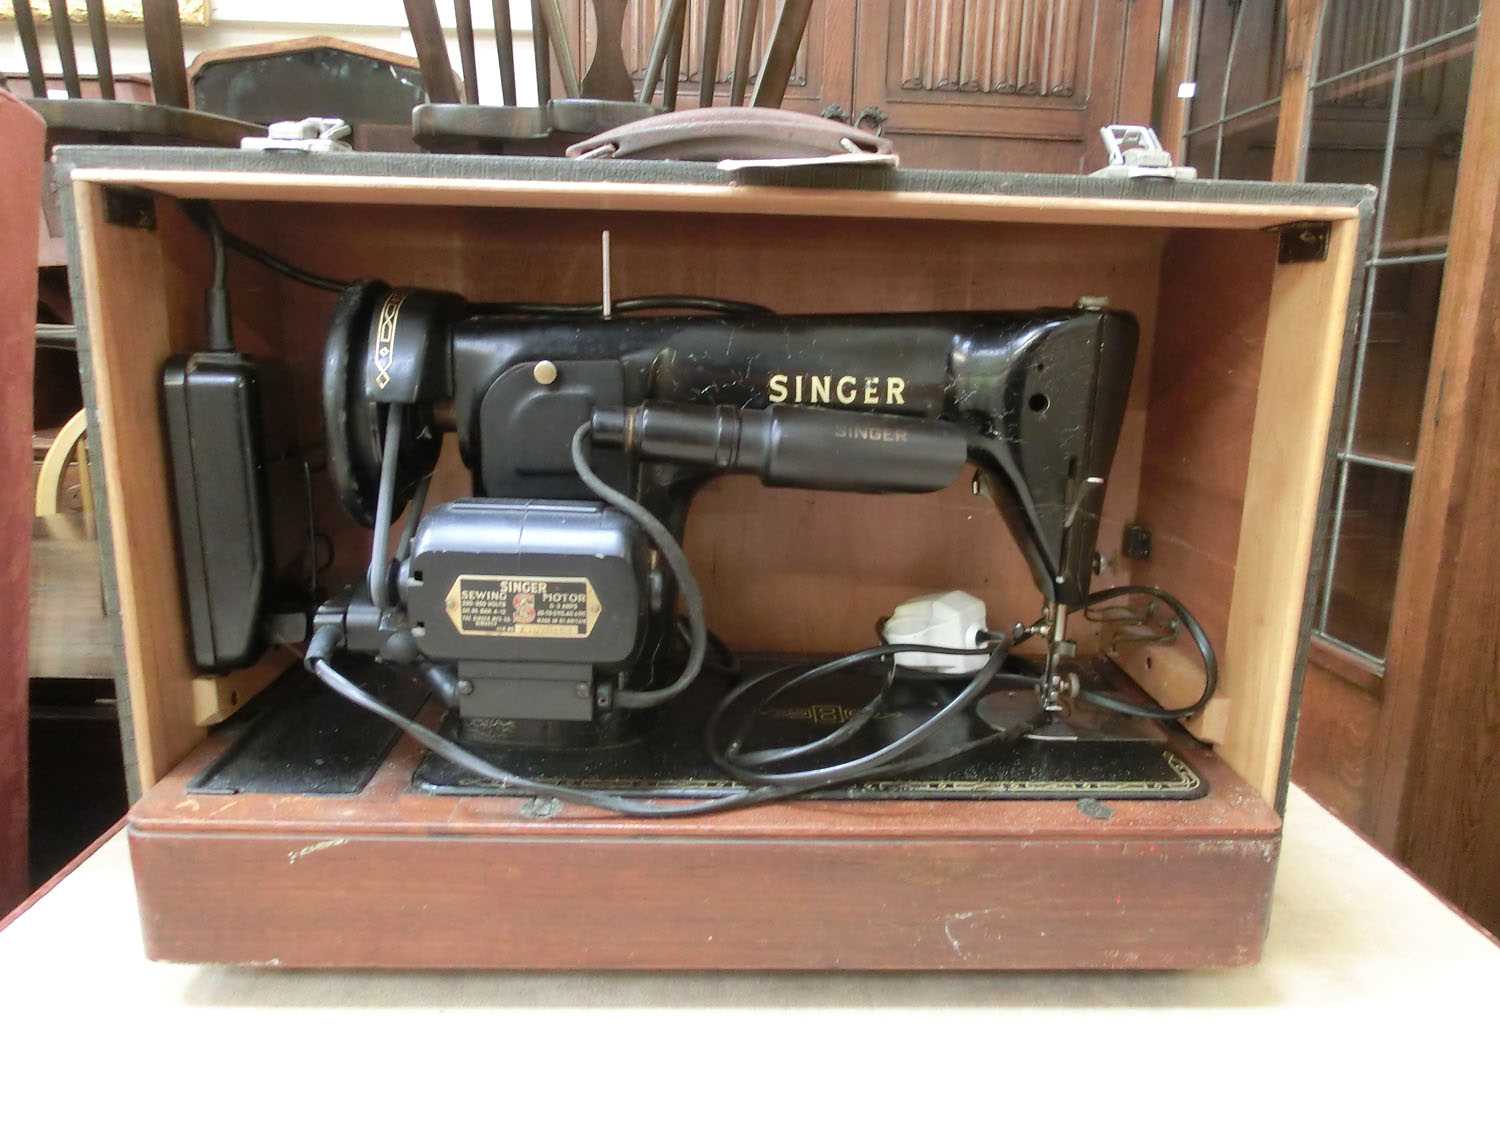 A cased electric Singer sewing machine